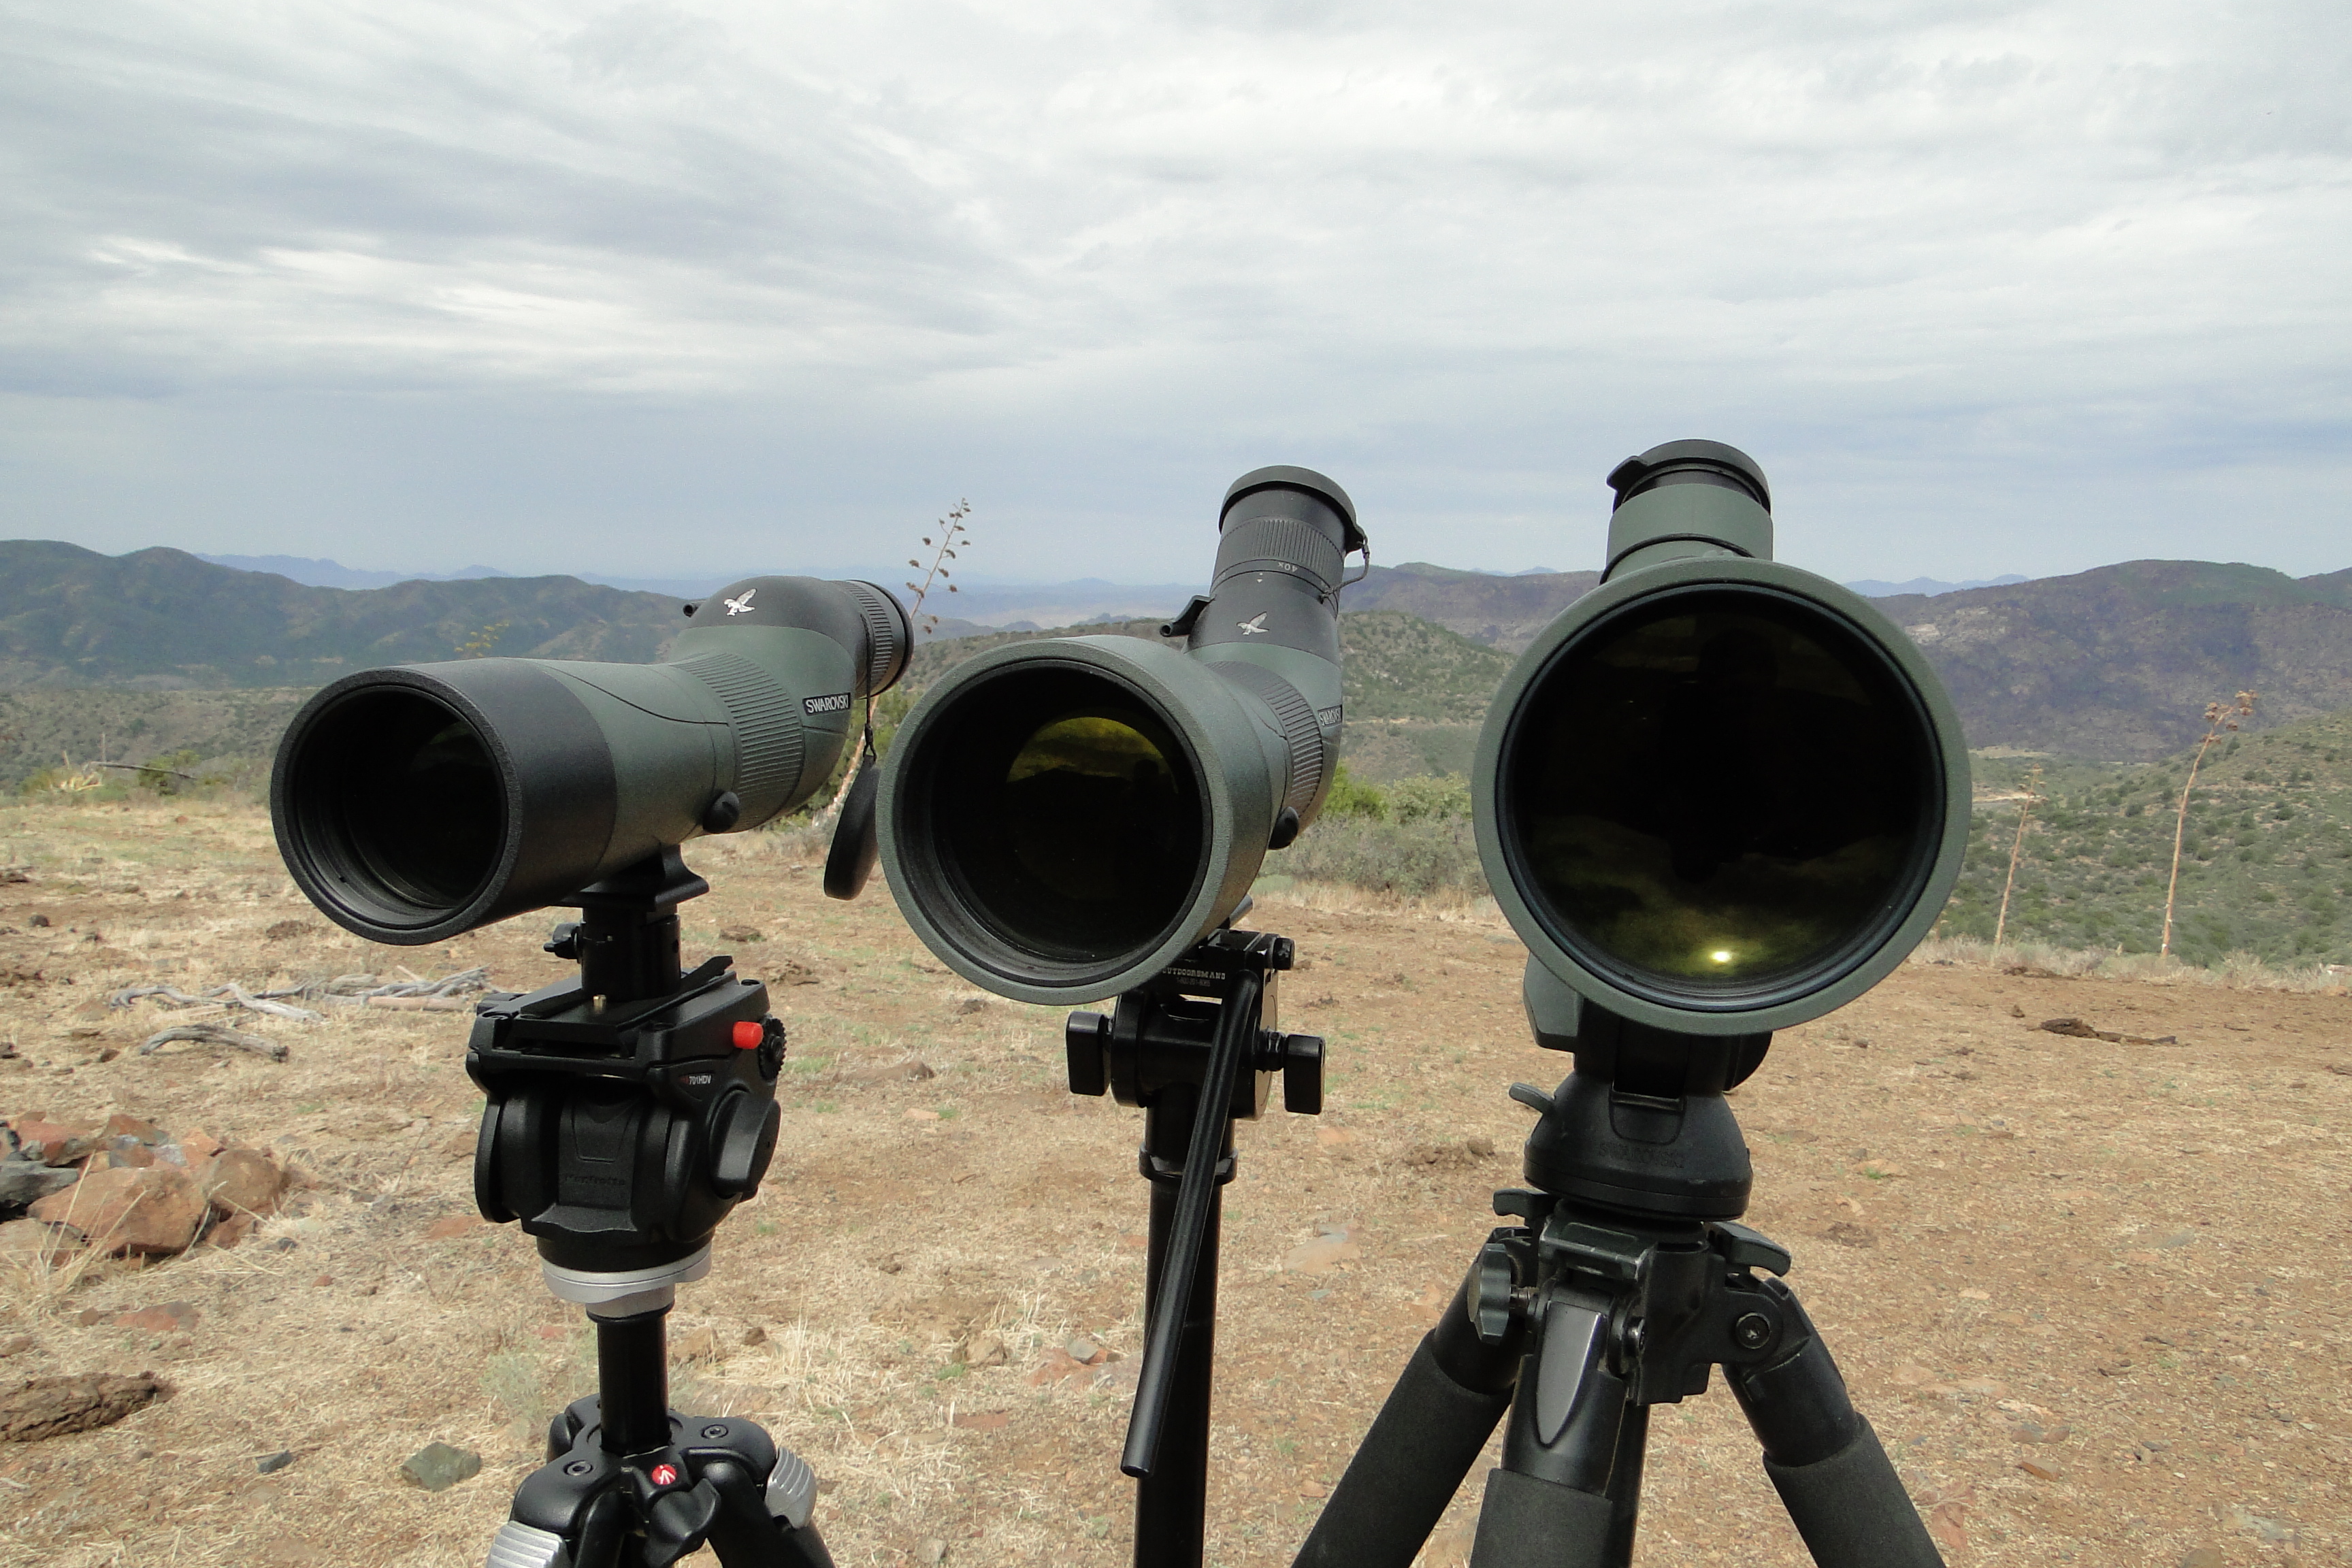 Side by side comparison of the 65mm, 85mm, and 95mm objectives Swarovski spotting scopes